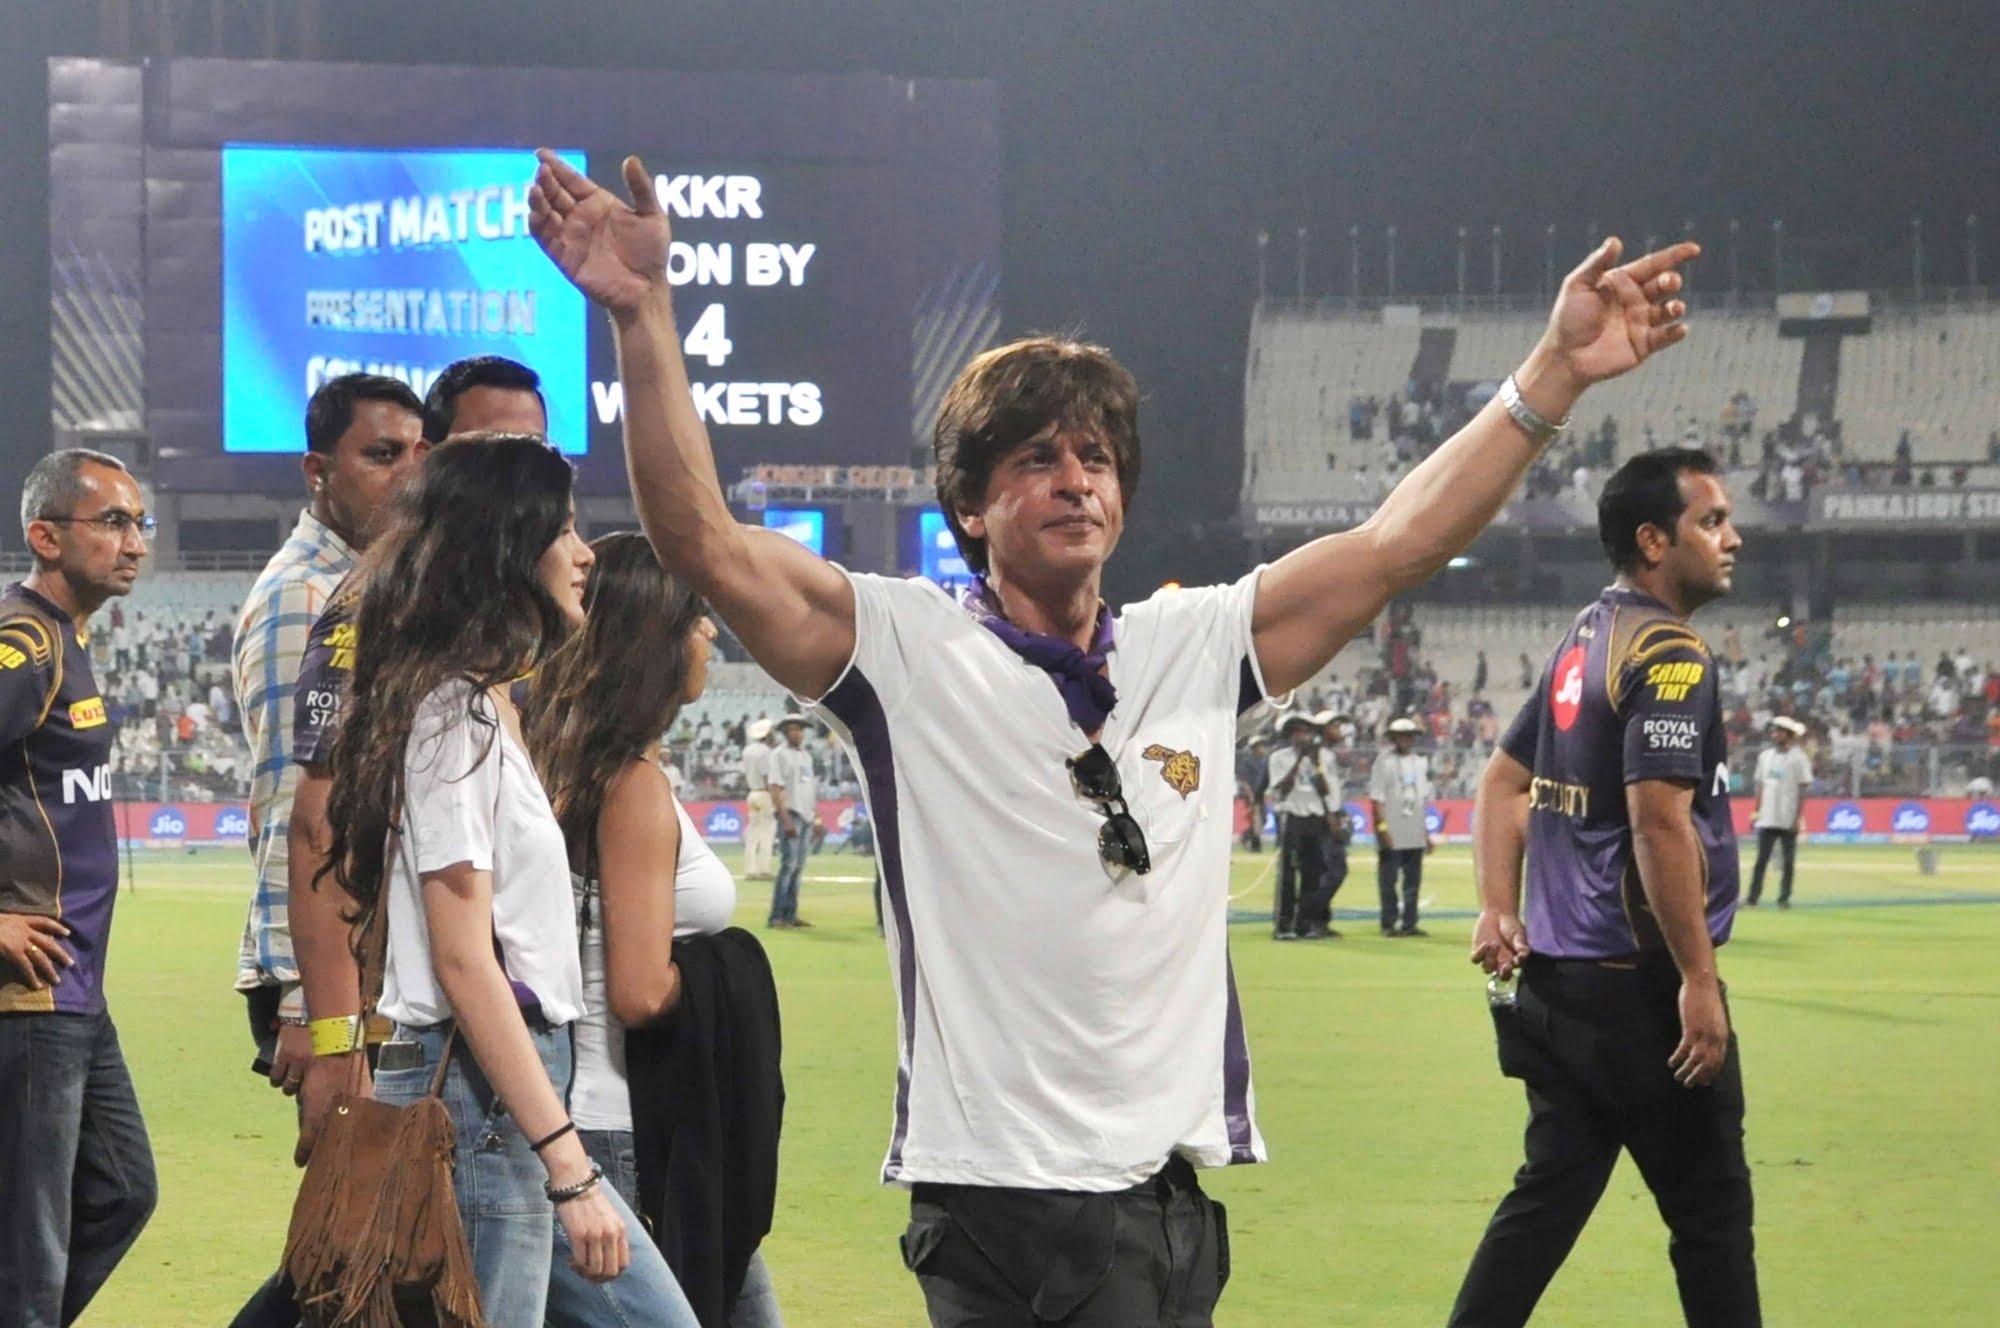 Kolkata Knight Riders co-owner Shah Rukh Khan greets fans after Kolkata Knight Riders won an IPL 2018 match against Royal Challengers Bangalore at the Eden Gardens